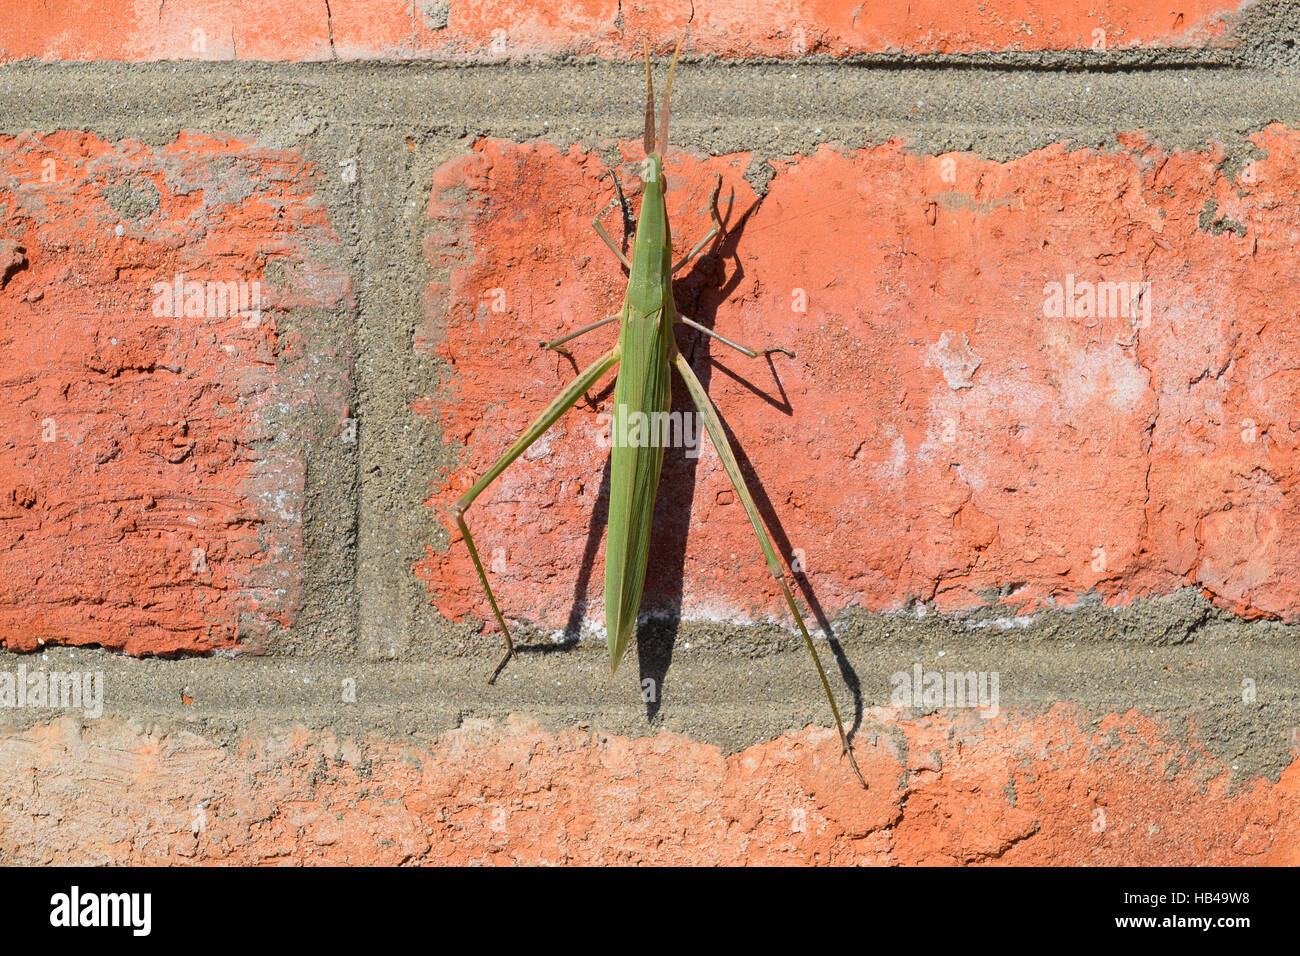 Green locusts, orthoptera insect Stock Photo